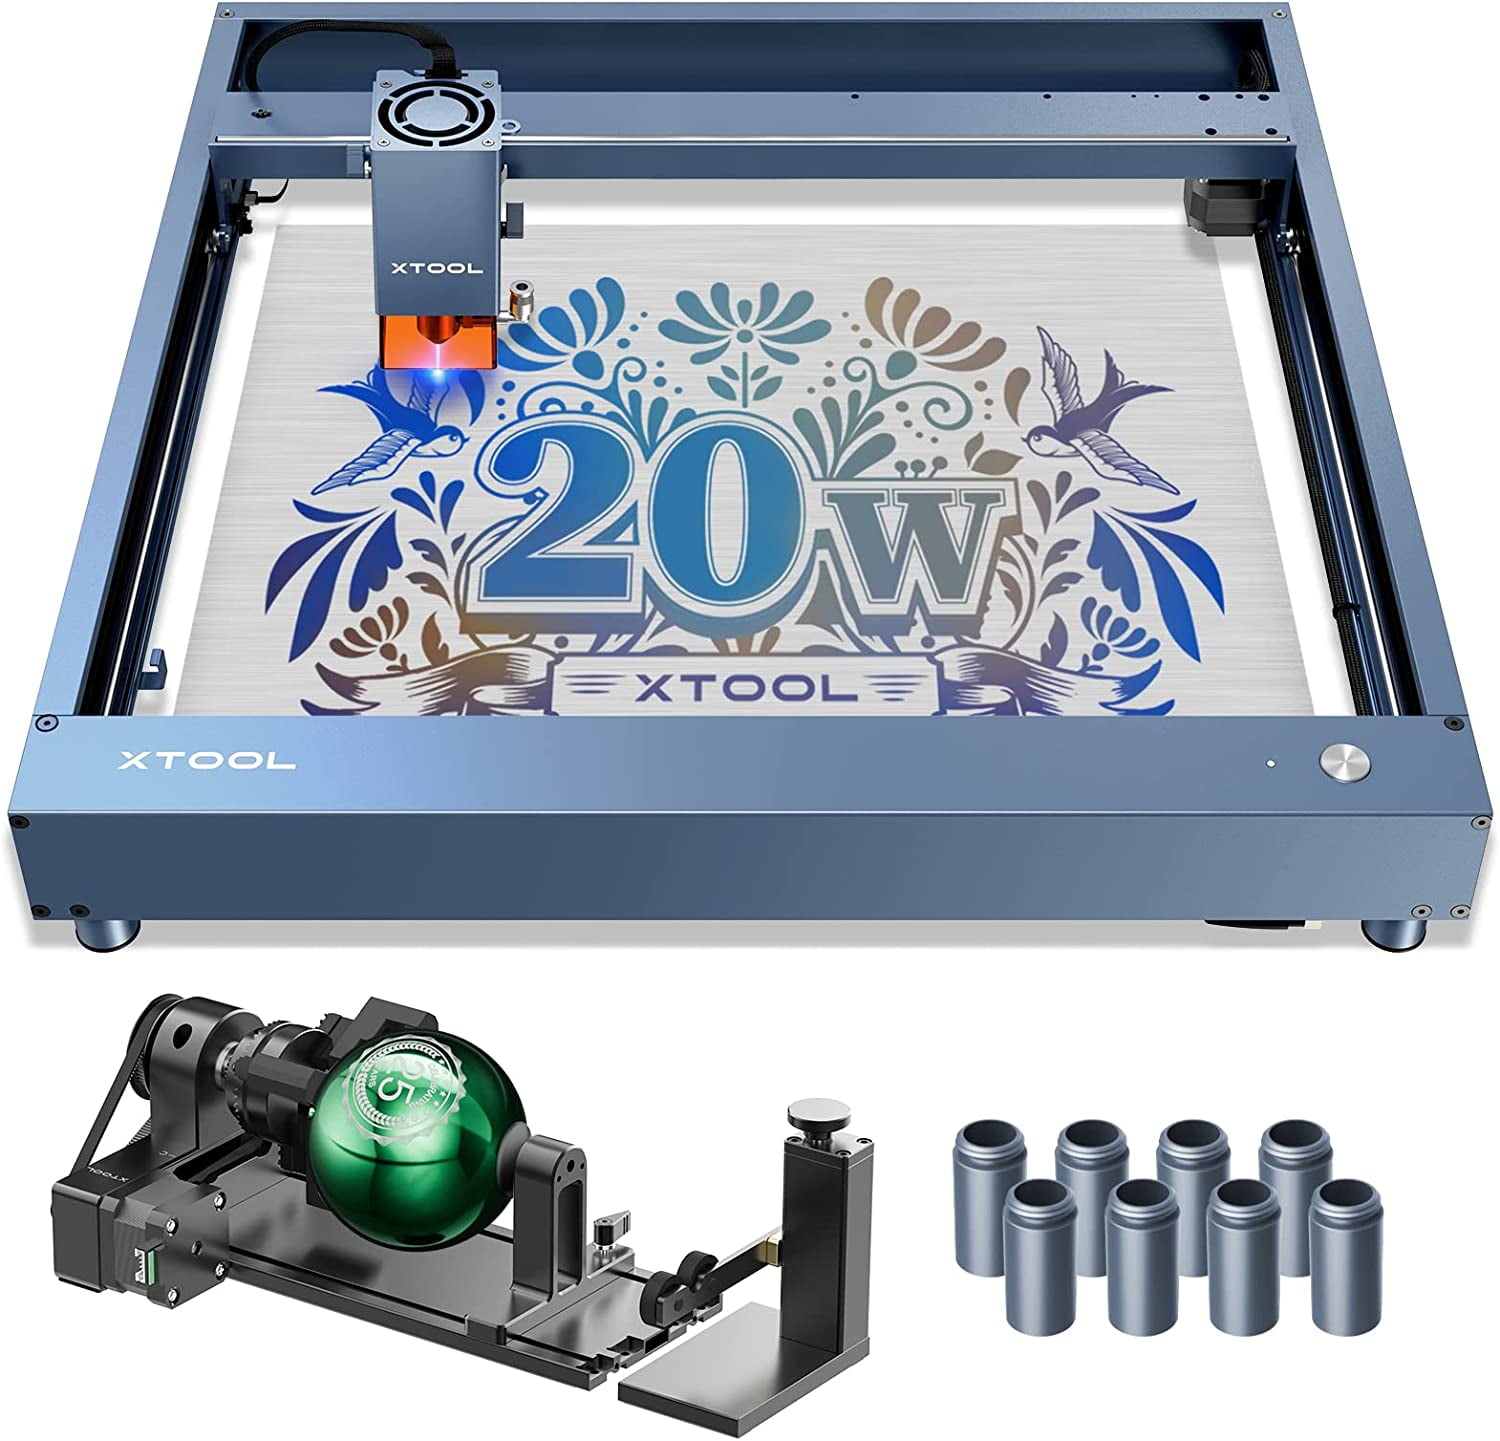 Is the new xTool S1 the most powerful laser cutter for everyone?